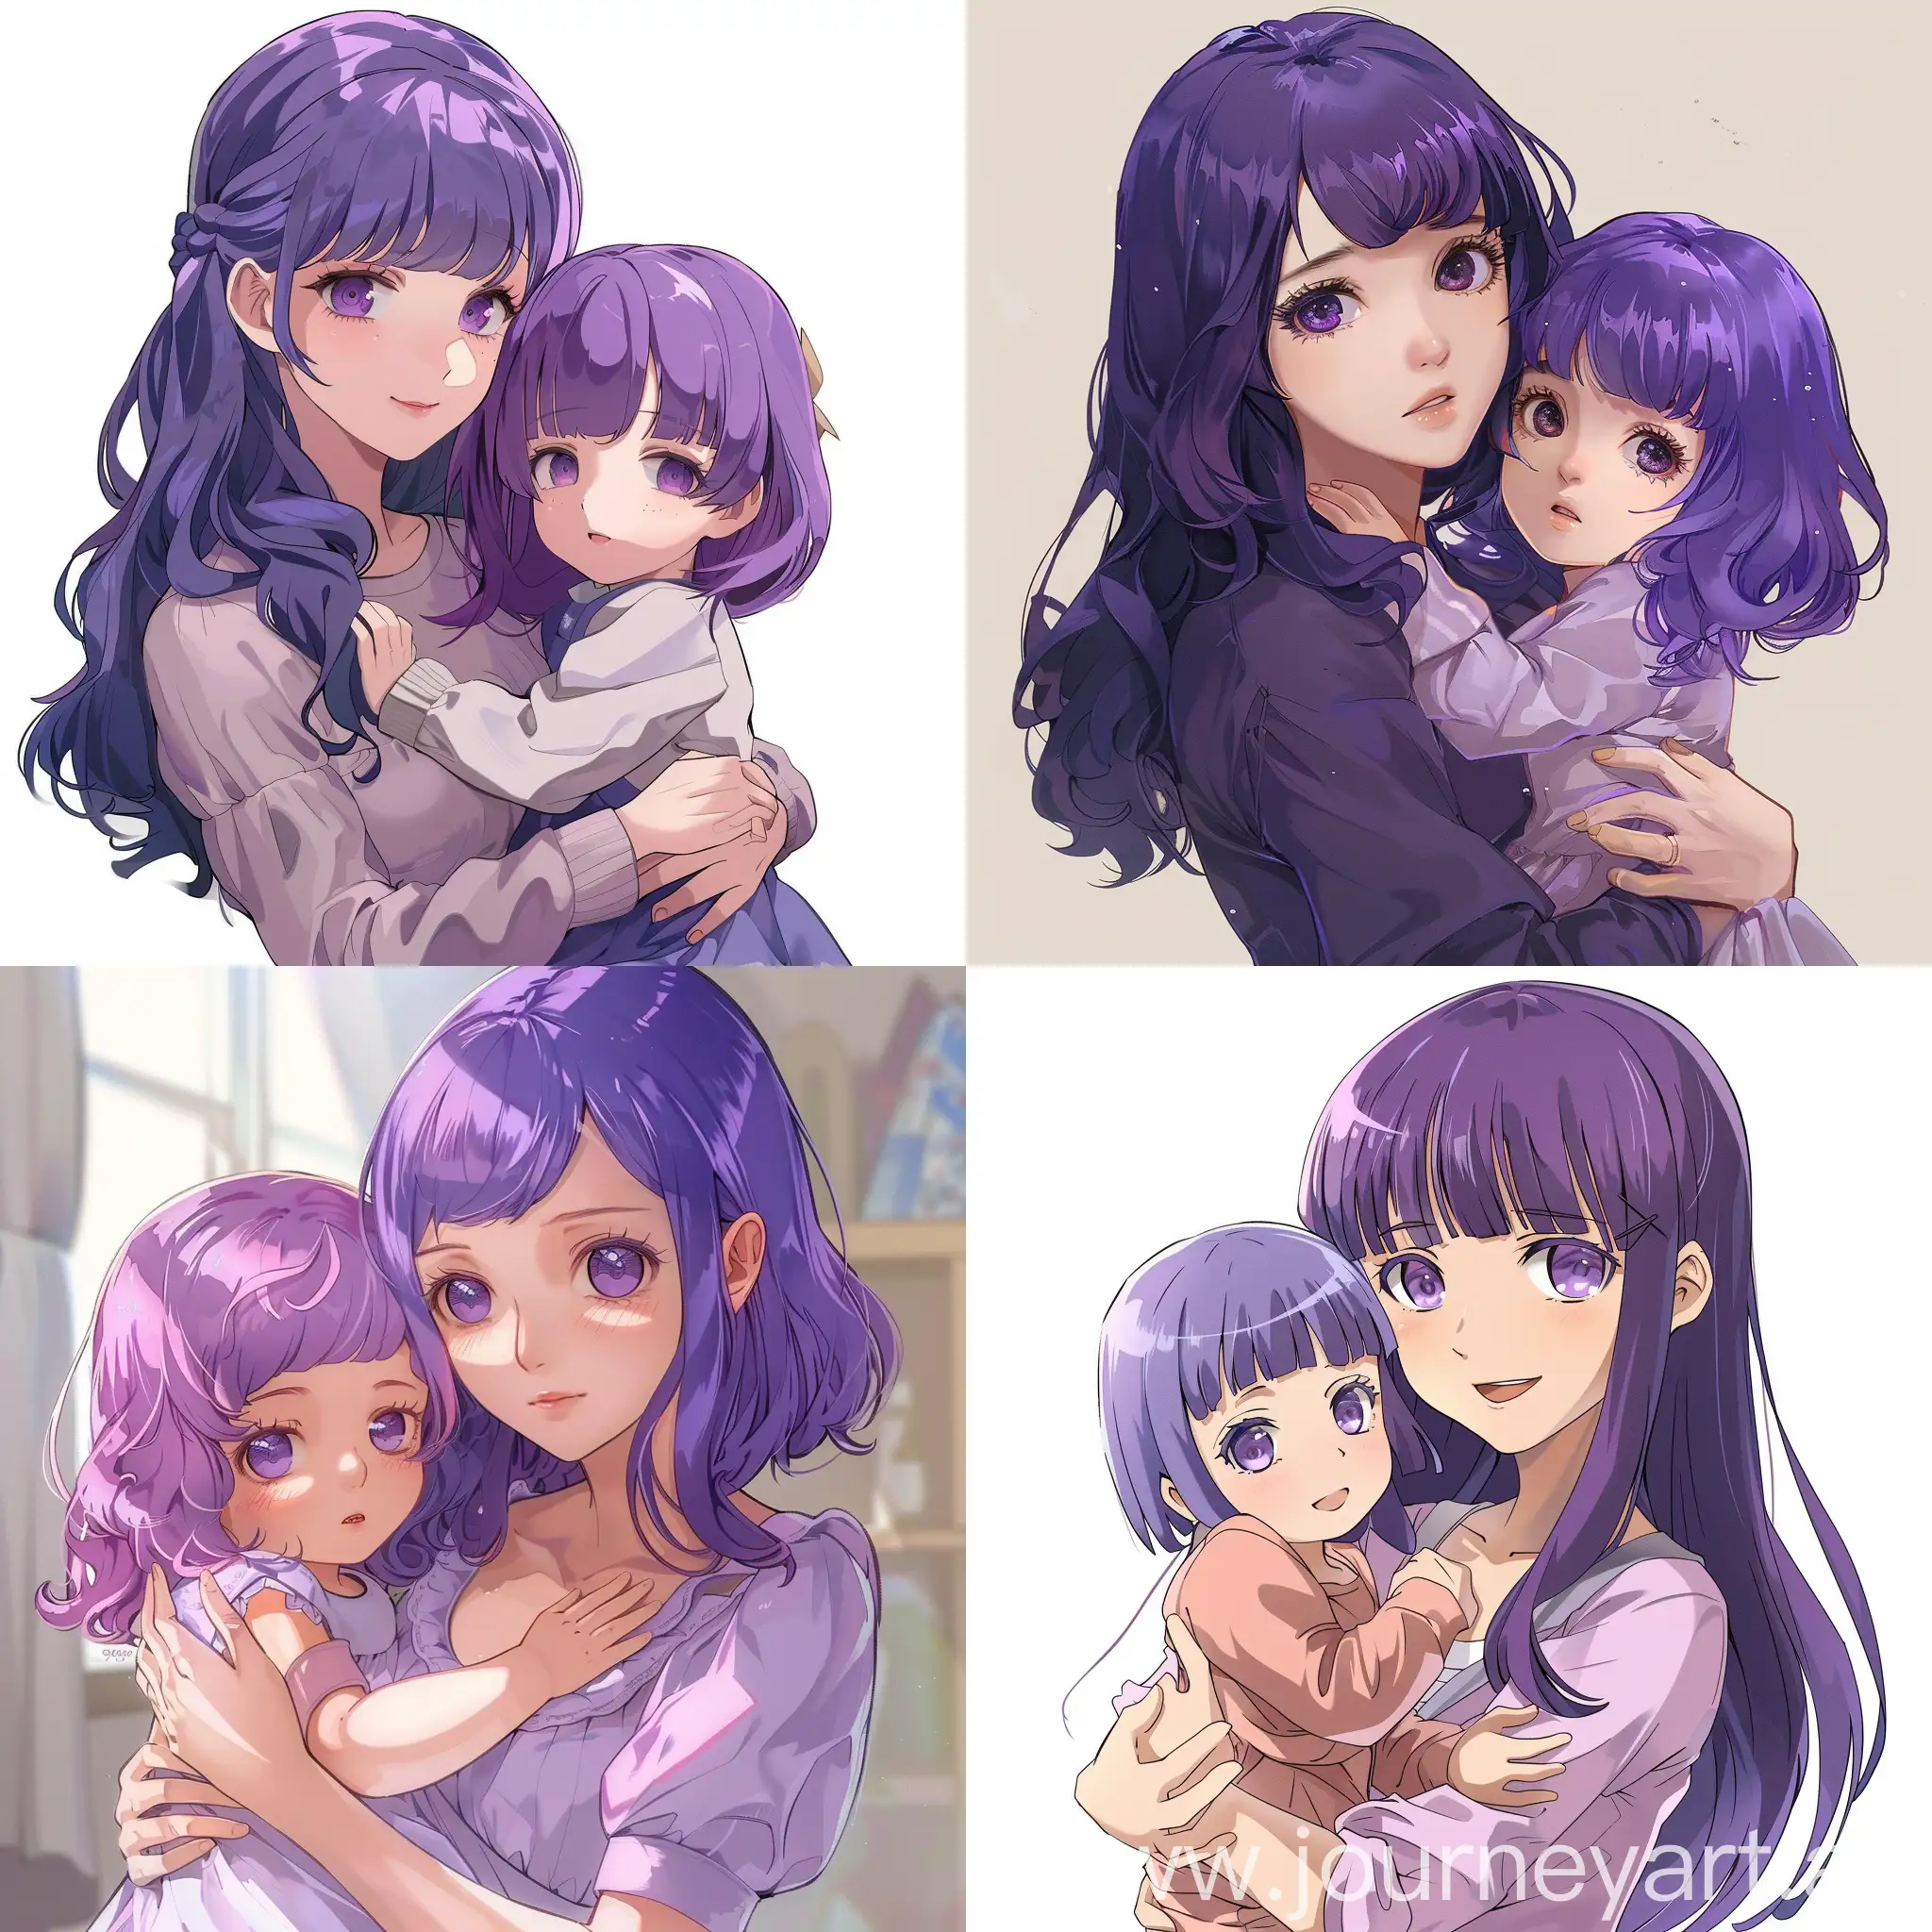 Adorable-Anime-Mother-Embracing-MiniMe-Daughter-with-Matching-Purple-Hair